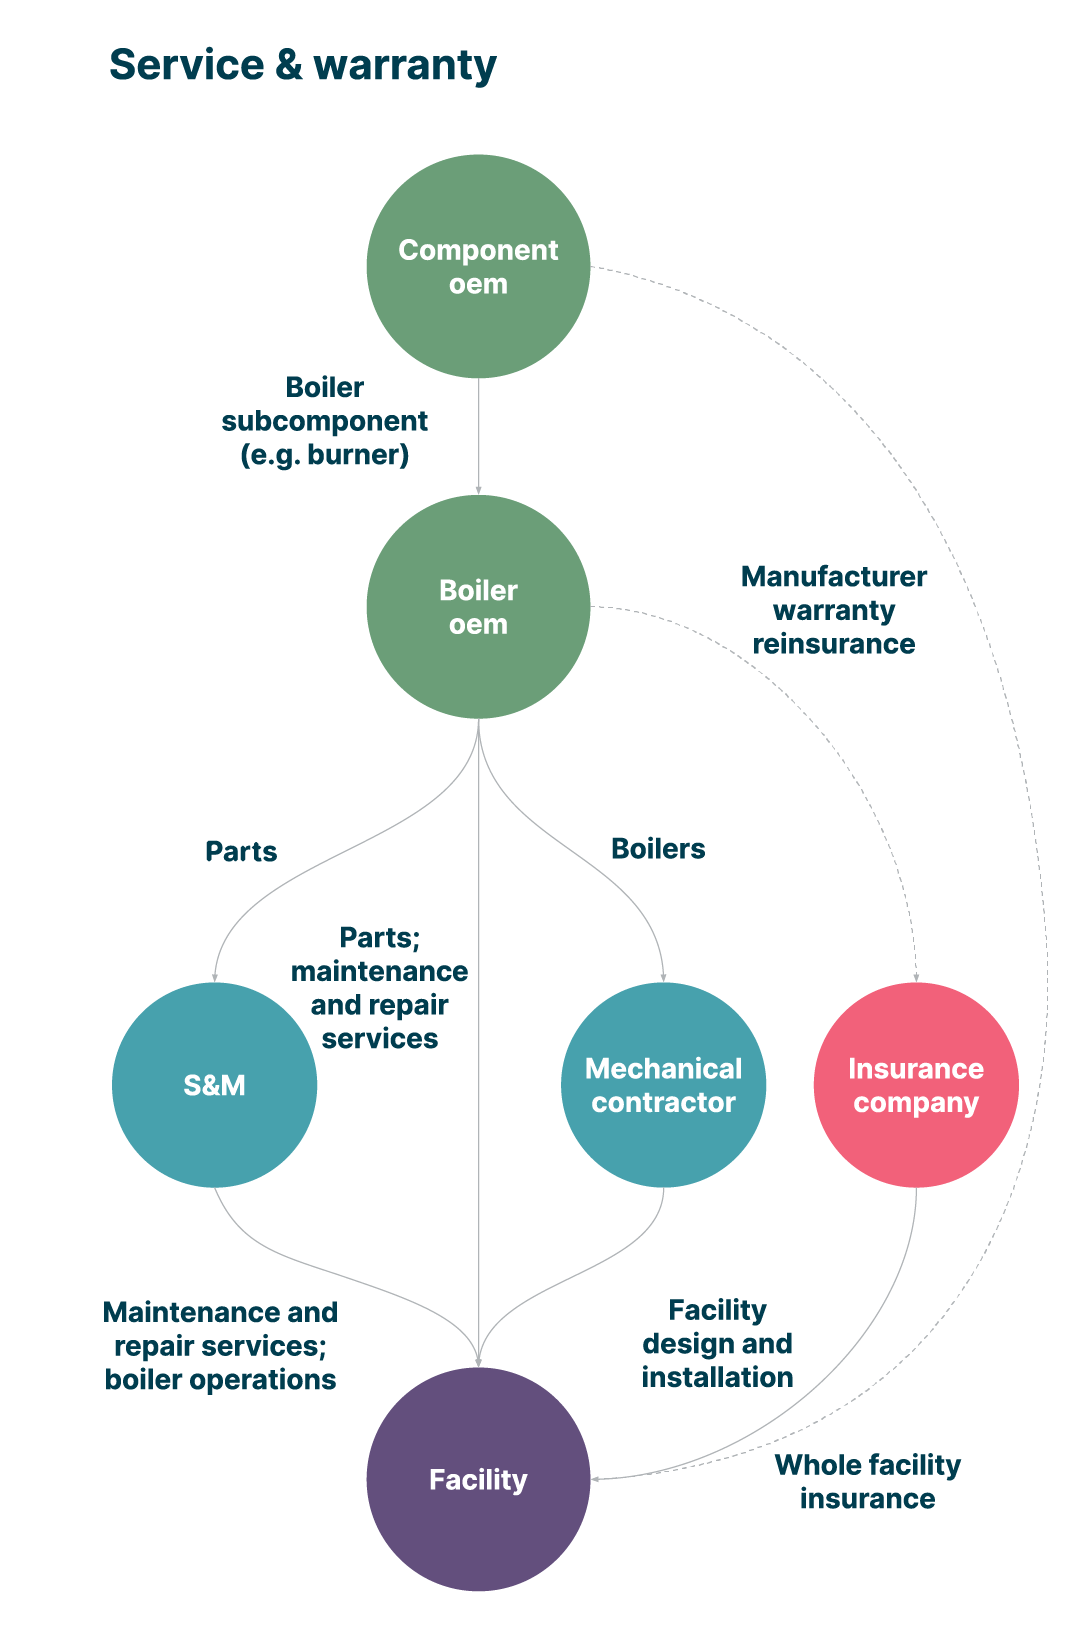 : An ecosystem diagram showing the life cycle of industrial machinery, including the stages of manufacture, sale, maintenance and insurance against downtime and failure. The diagram shows different components and their interactions within the ecosystem.